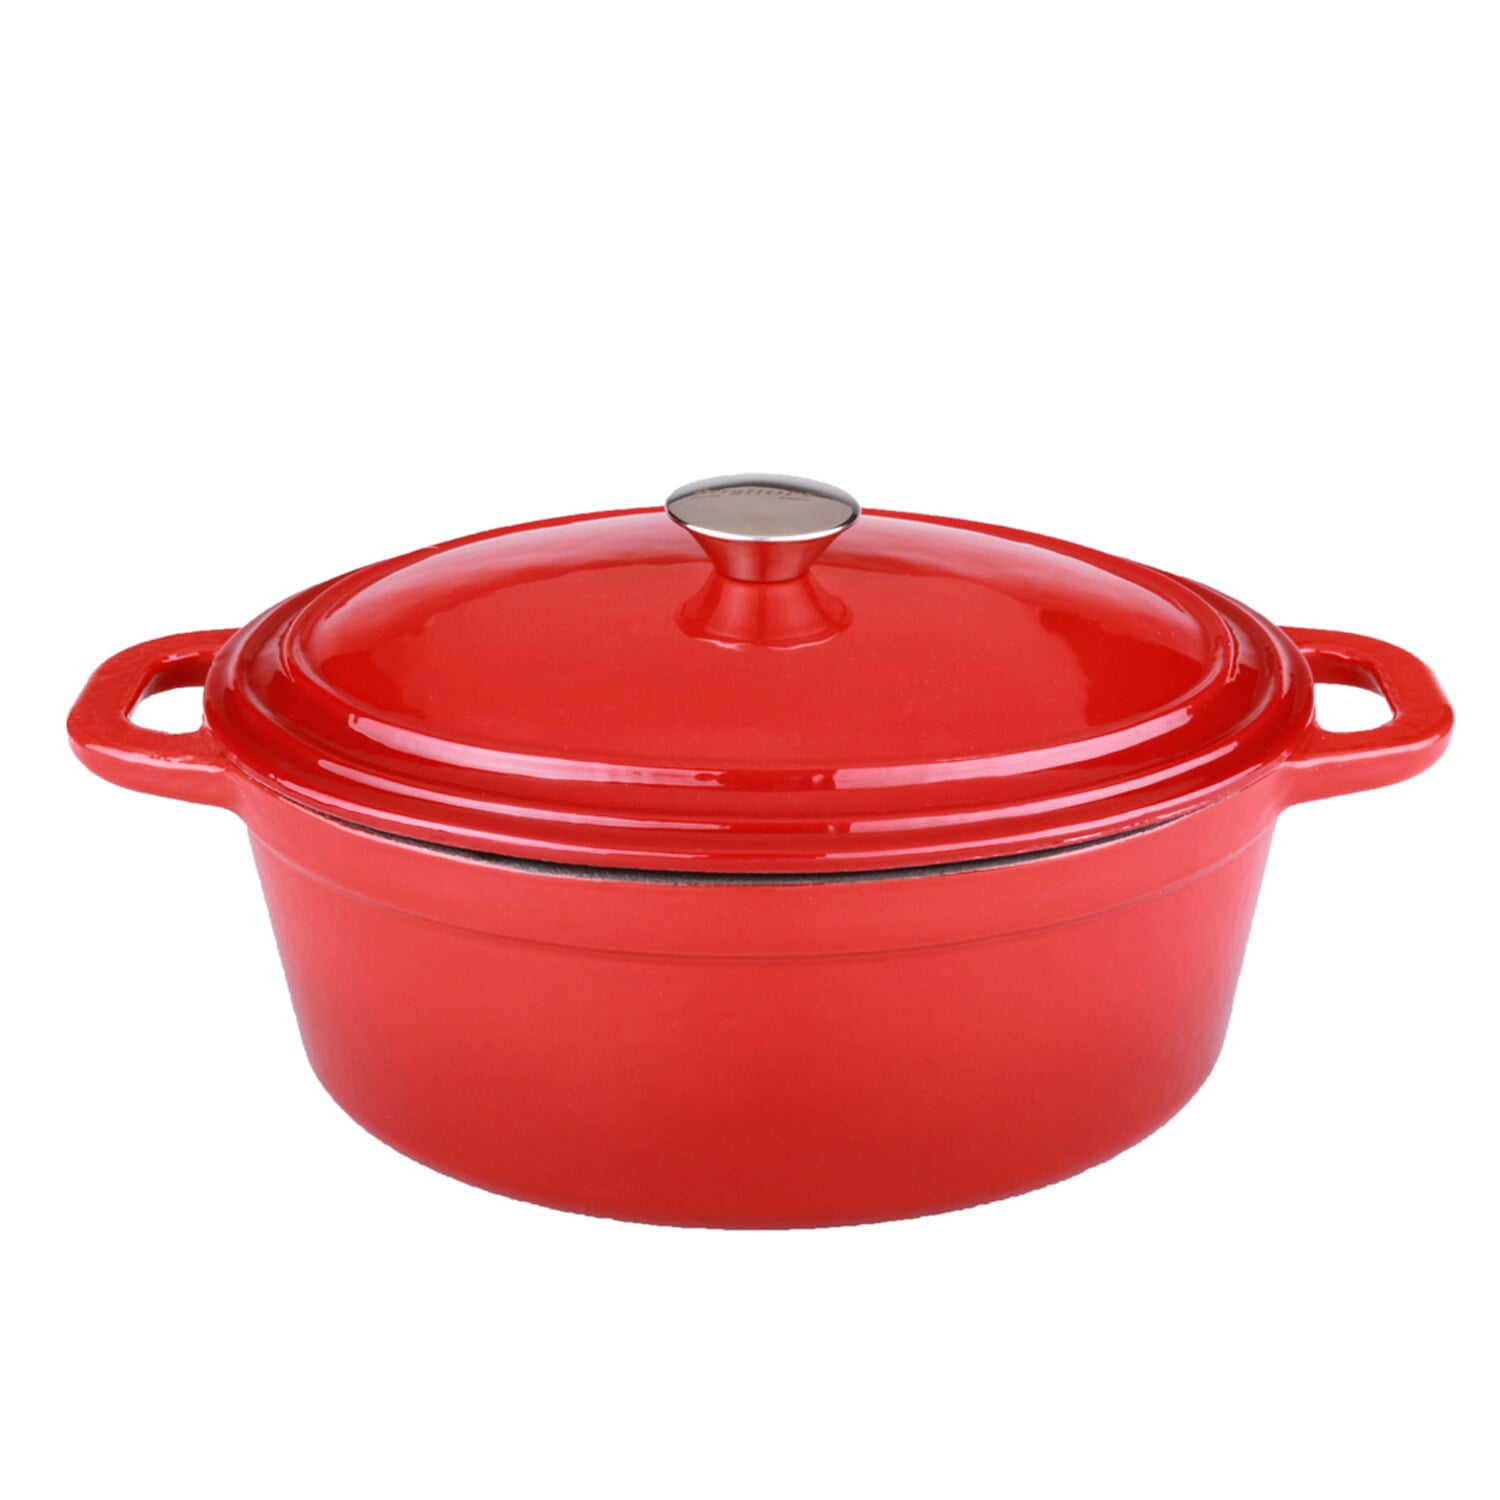 Rare FOOD NETWORK Red Enameled Cast Iron Oval 5.5 quart Dutch Oven ~ Clean